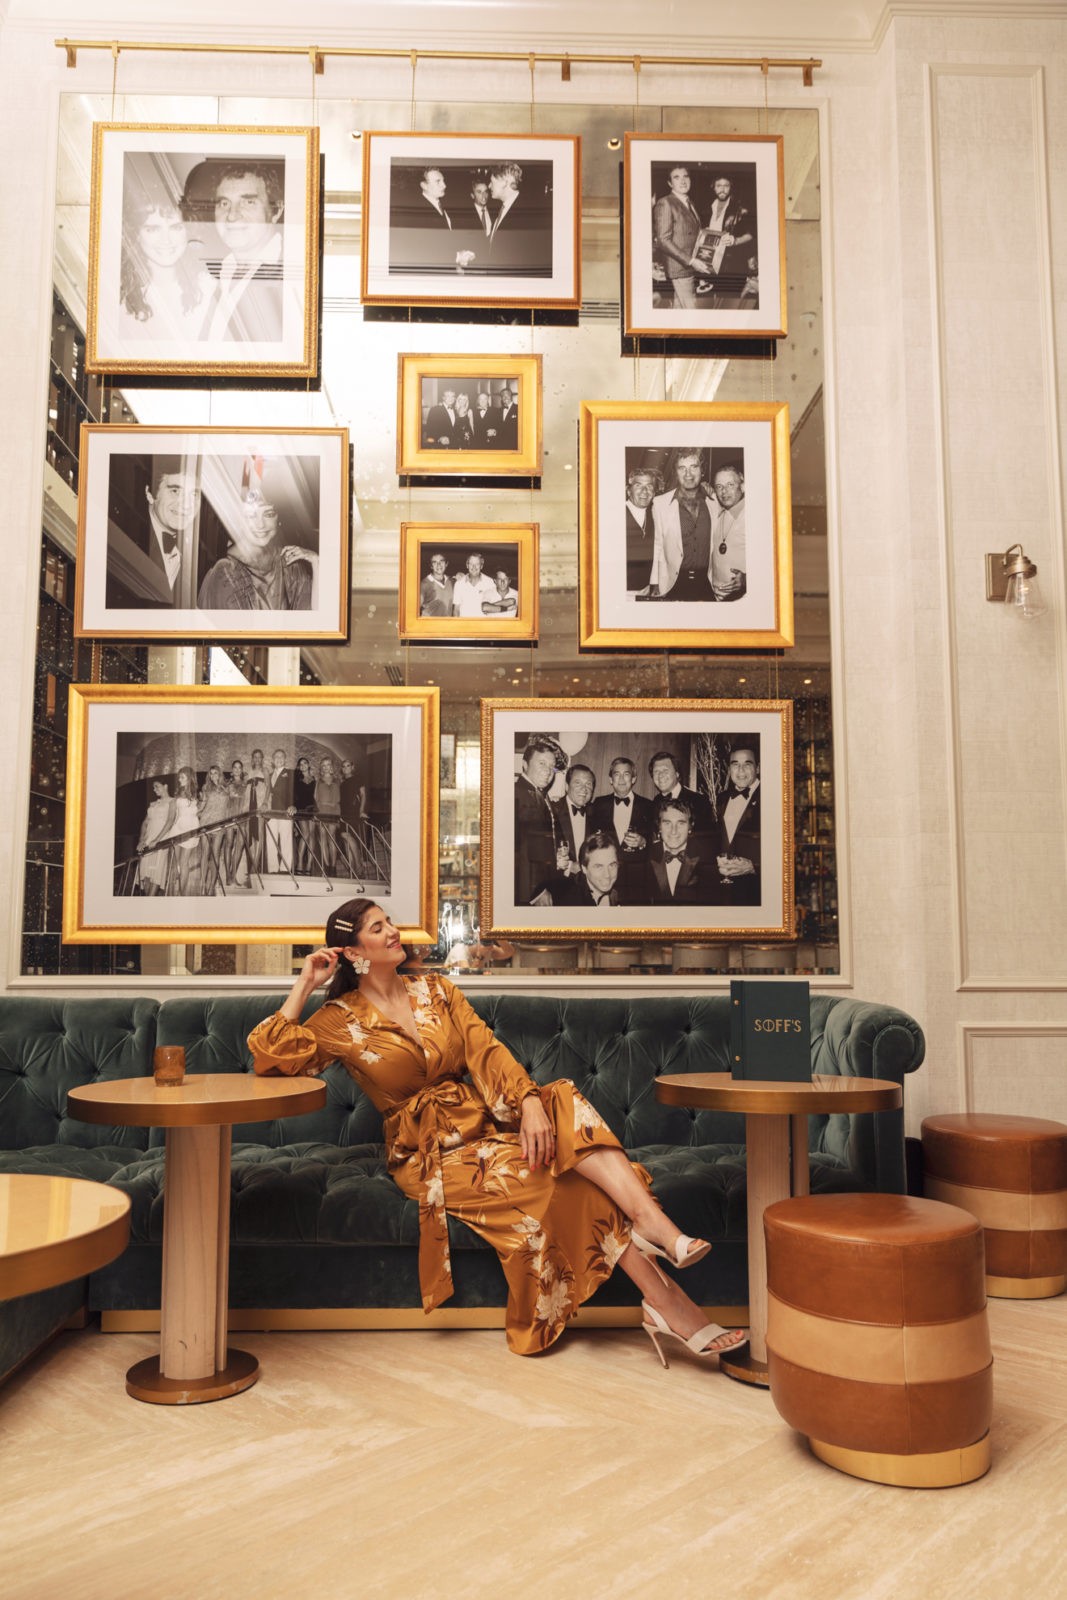 JW Marriott Turnberry Resort Miami by popular travel blogger, Laura Lily: image of a woman sitting in the Miami Turnberry Resort on a velvet tuft couch under a wall full of black and white photos in gold picture frames.